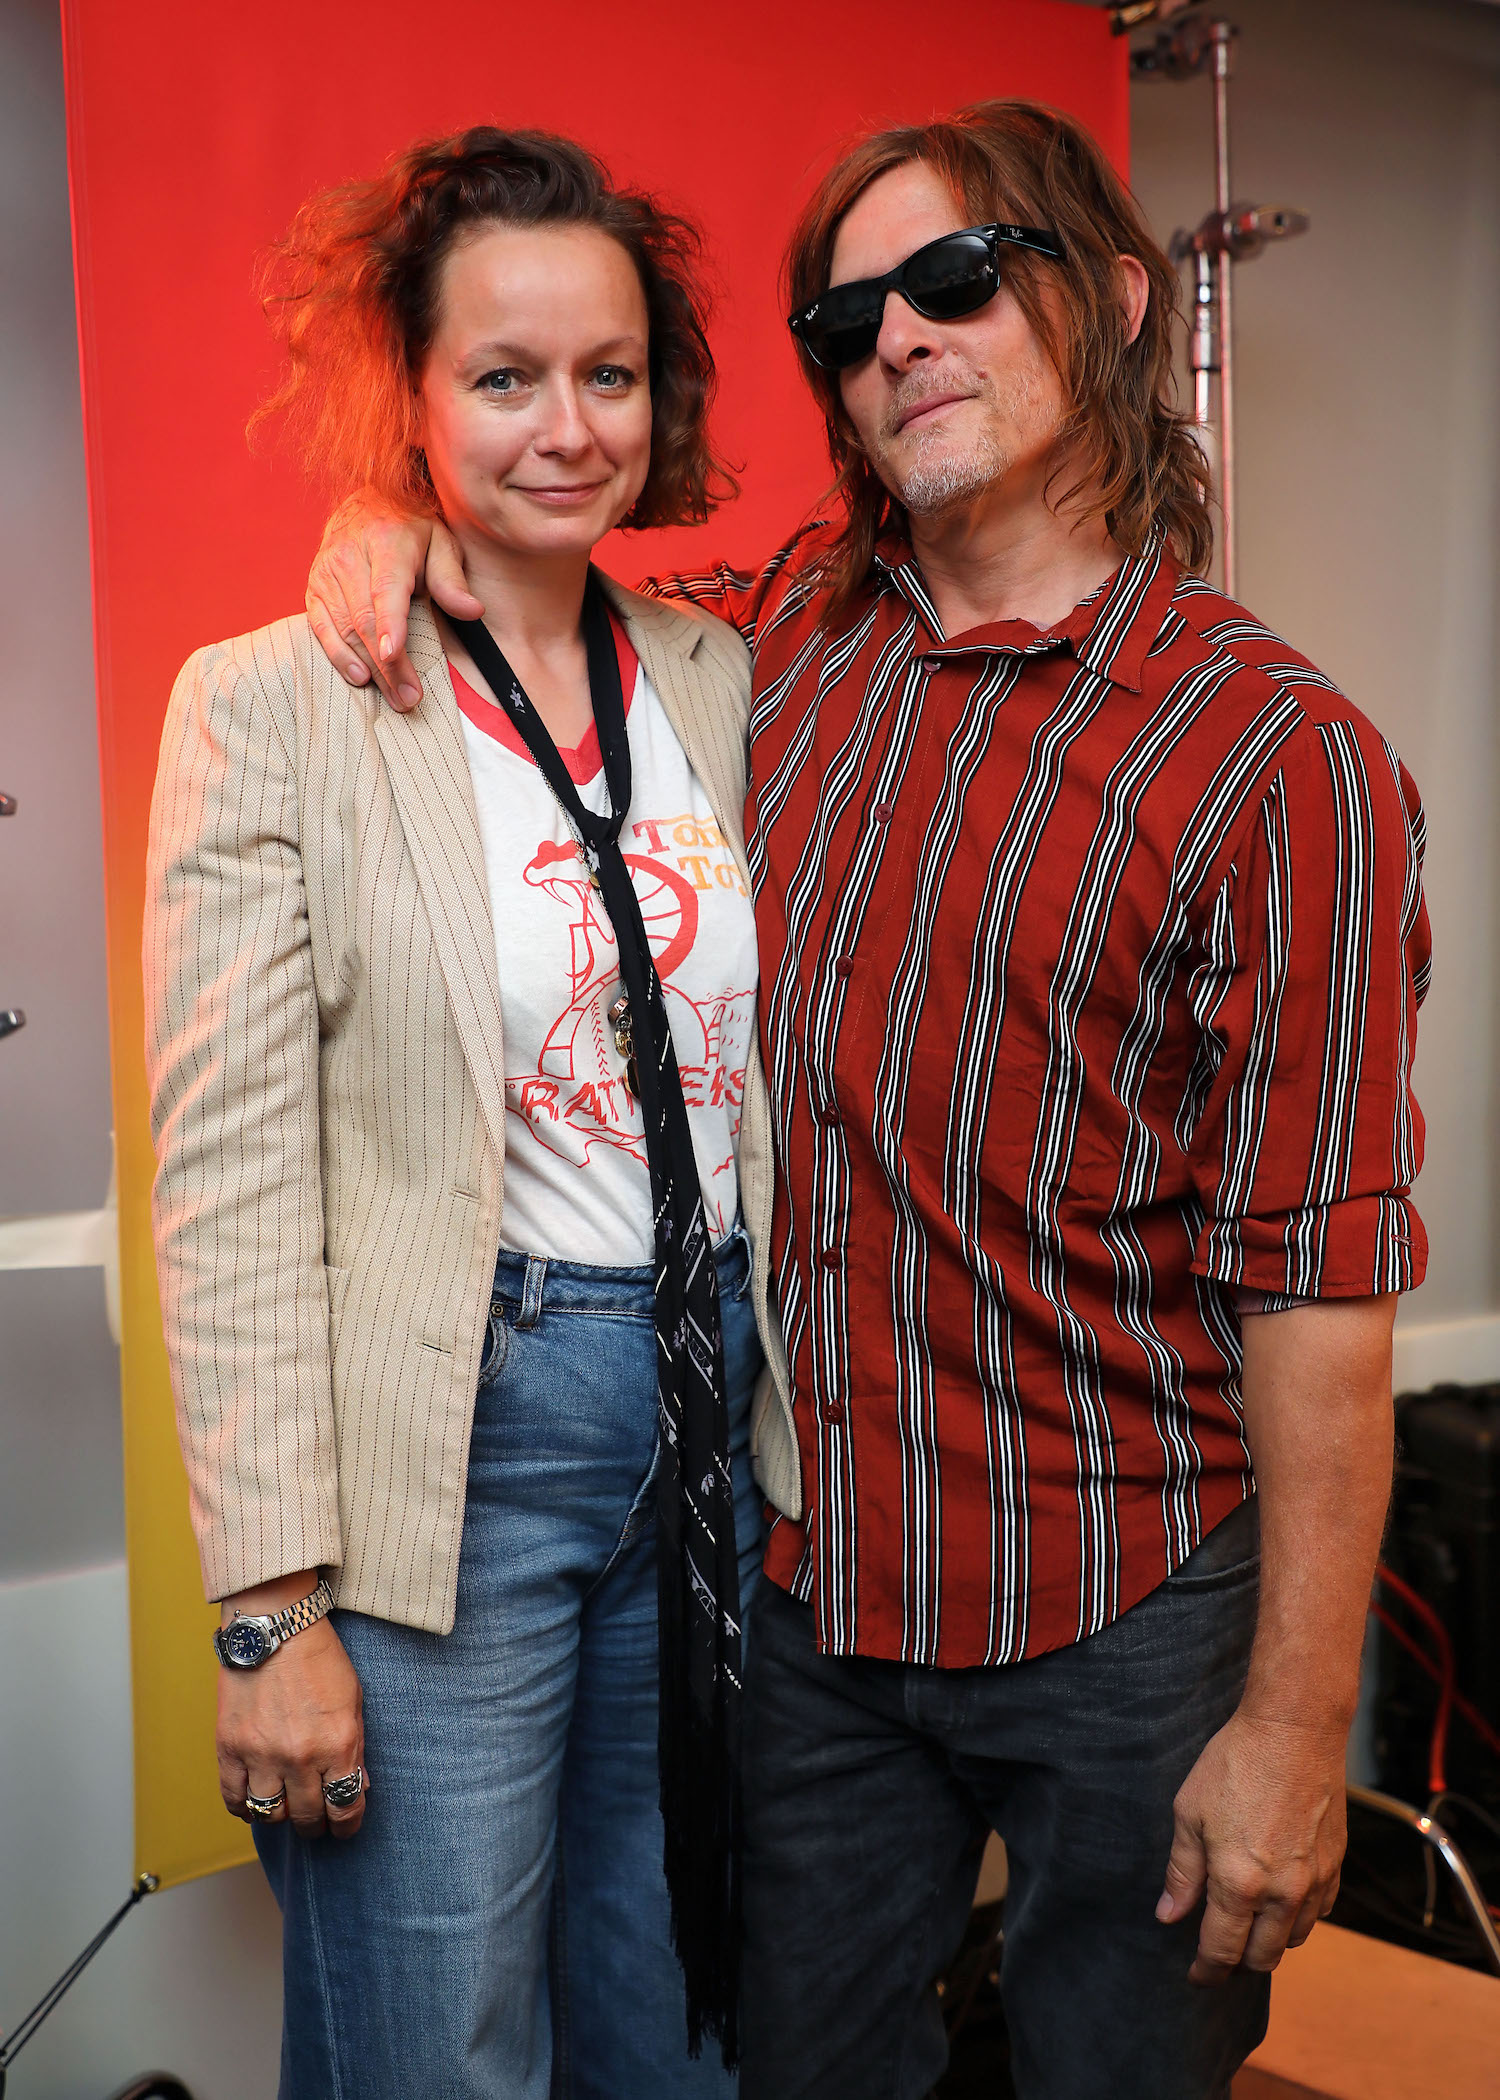 Samantha Morton of Tales of the Walking Dead, Norman Reedus of The Walking Dead